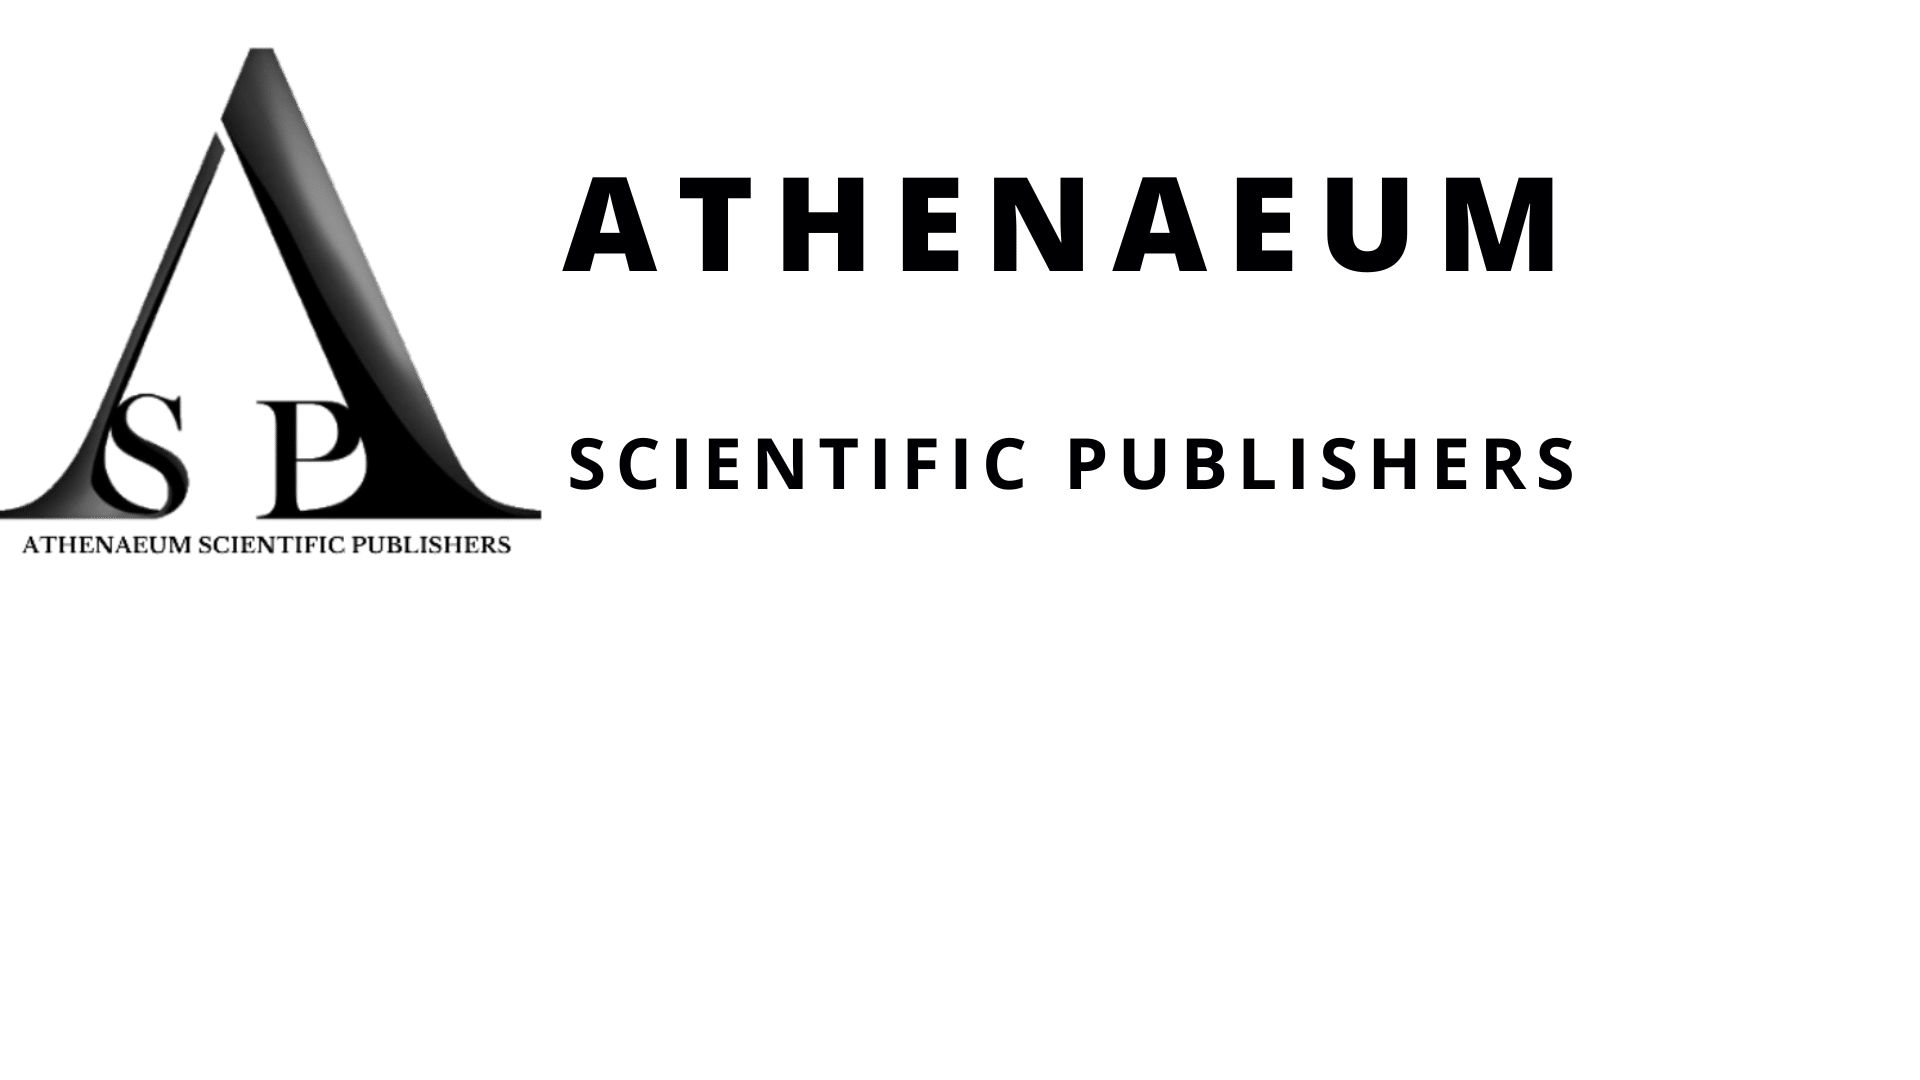 Athenaeum Scientific Publishers: Gateway to Medical Research